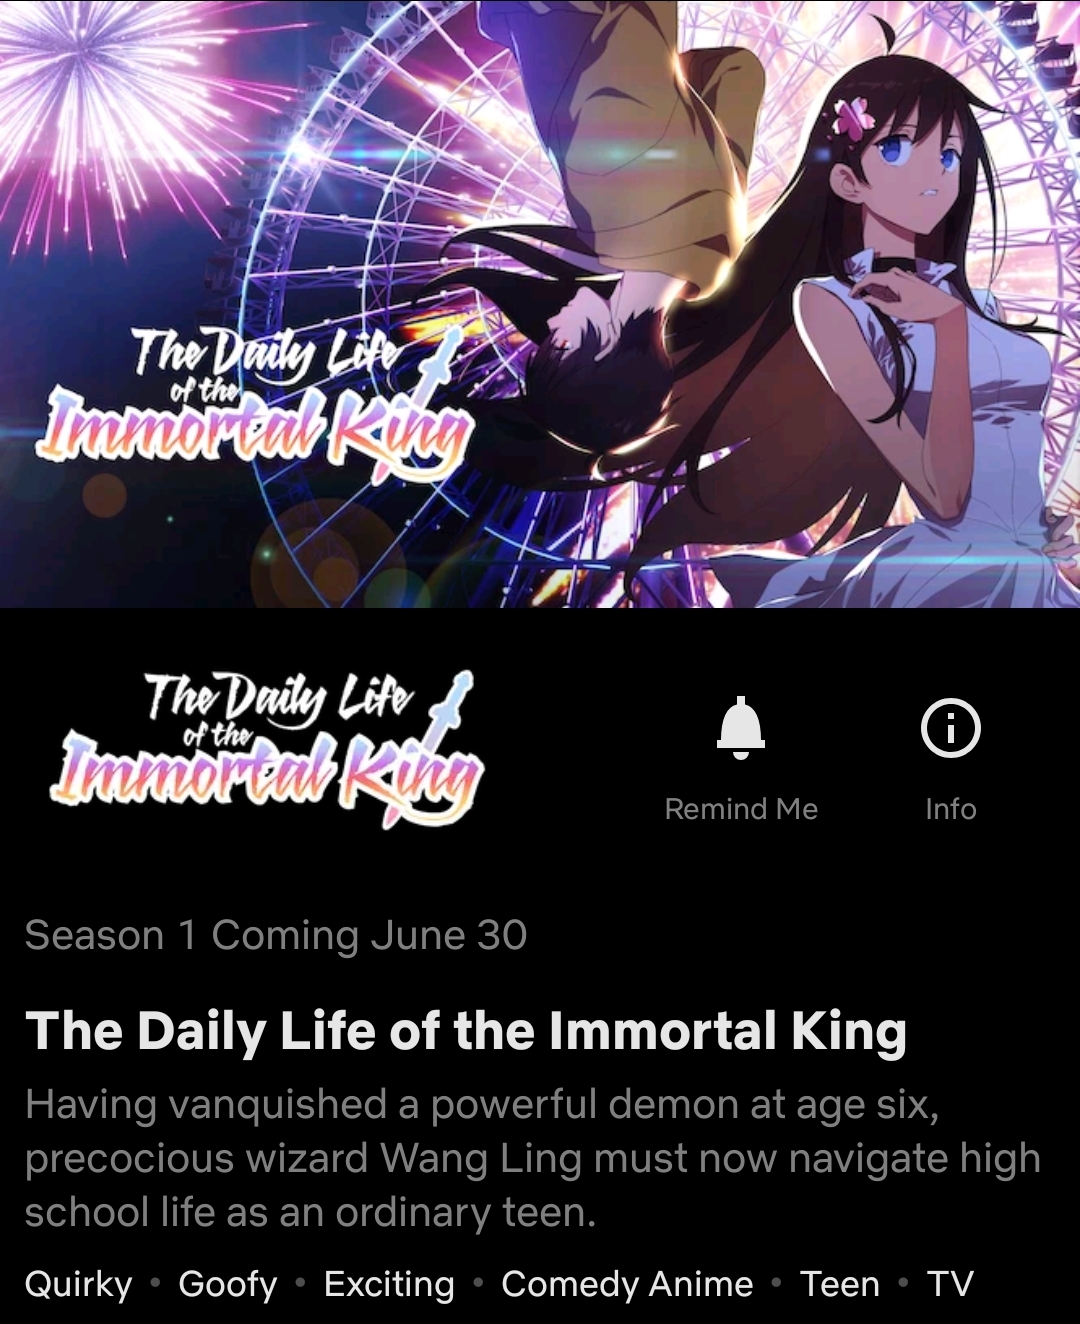 The Daily Life of the Immortal King - stream